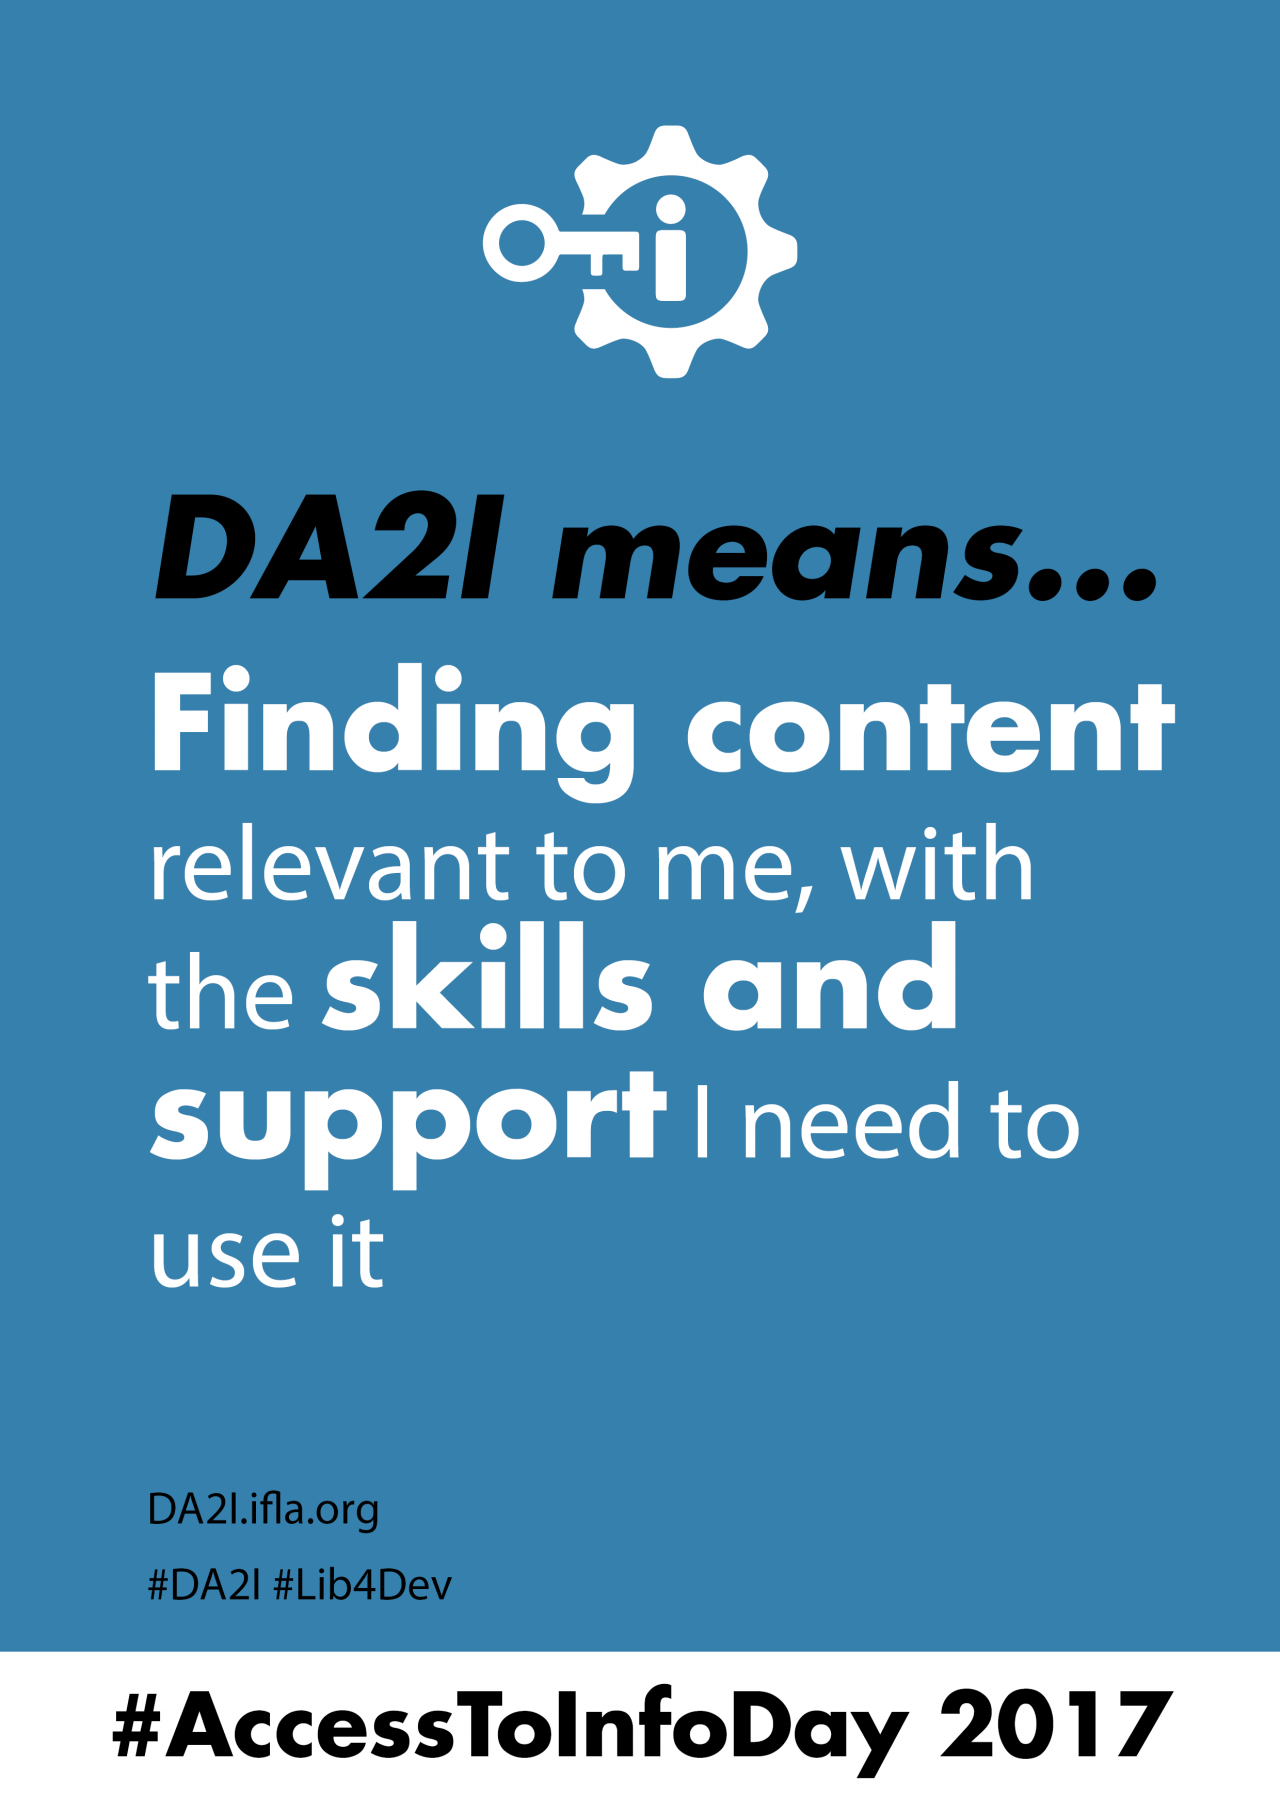 DA2I means finding content relevant to me, with the skills and support I need to use it